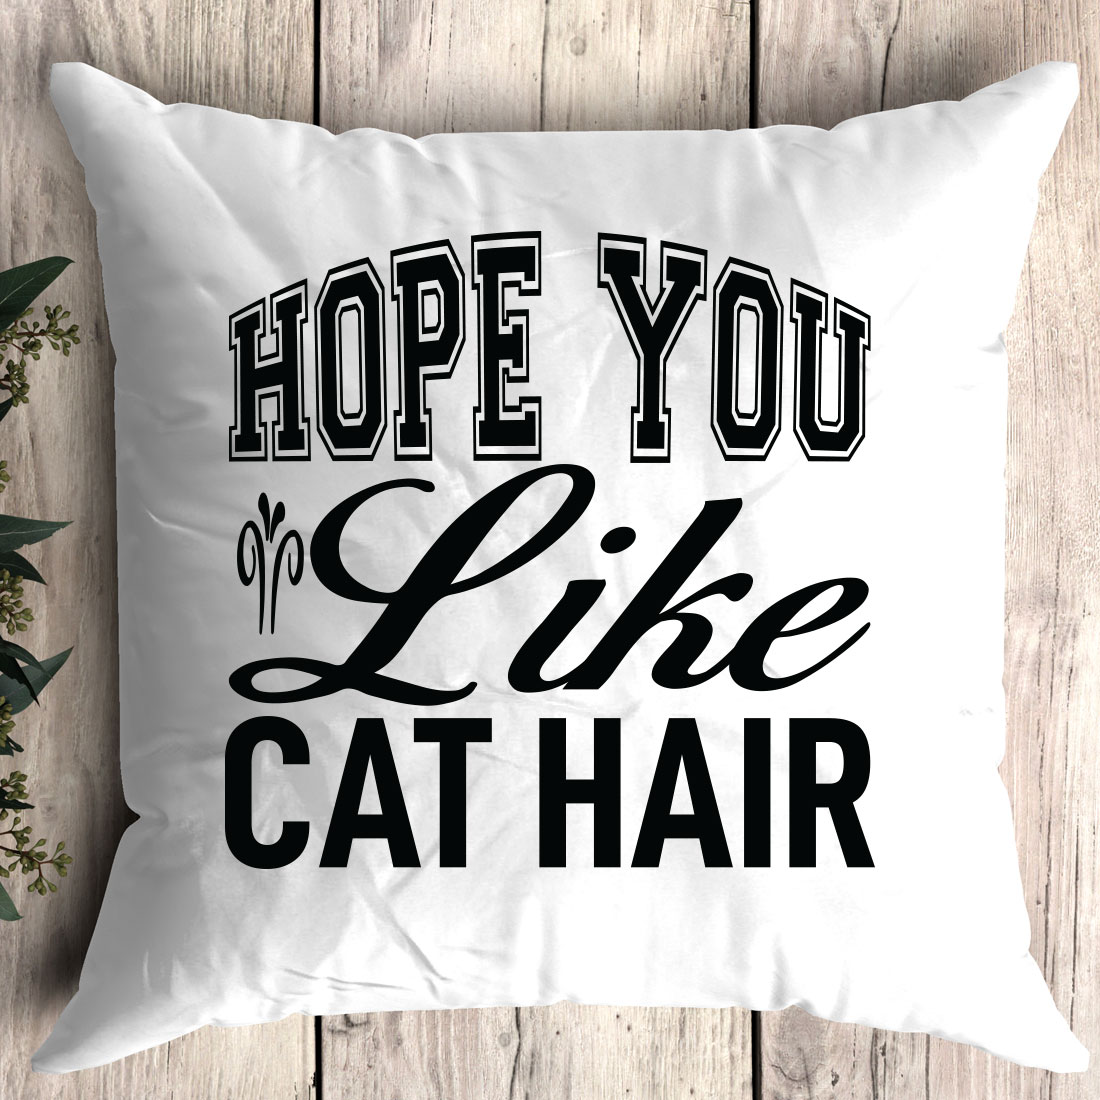 Pillow that says hope you like cat hair.